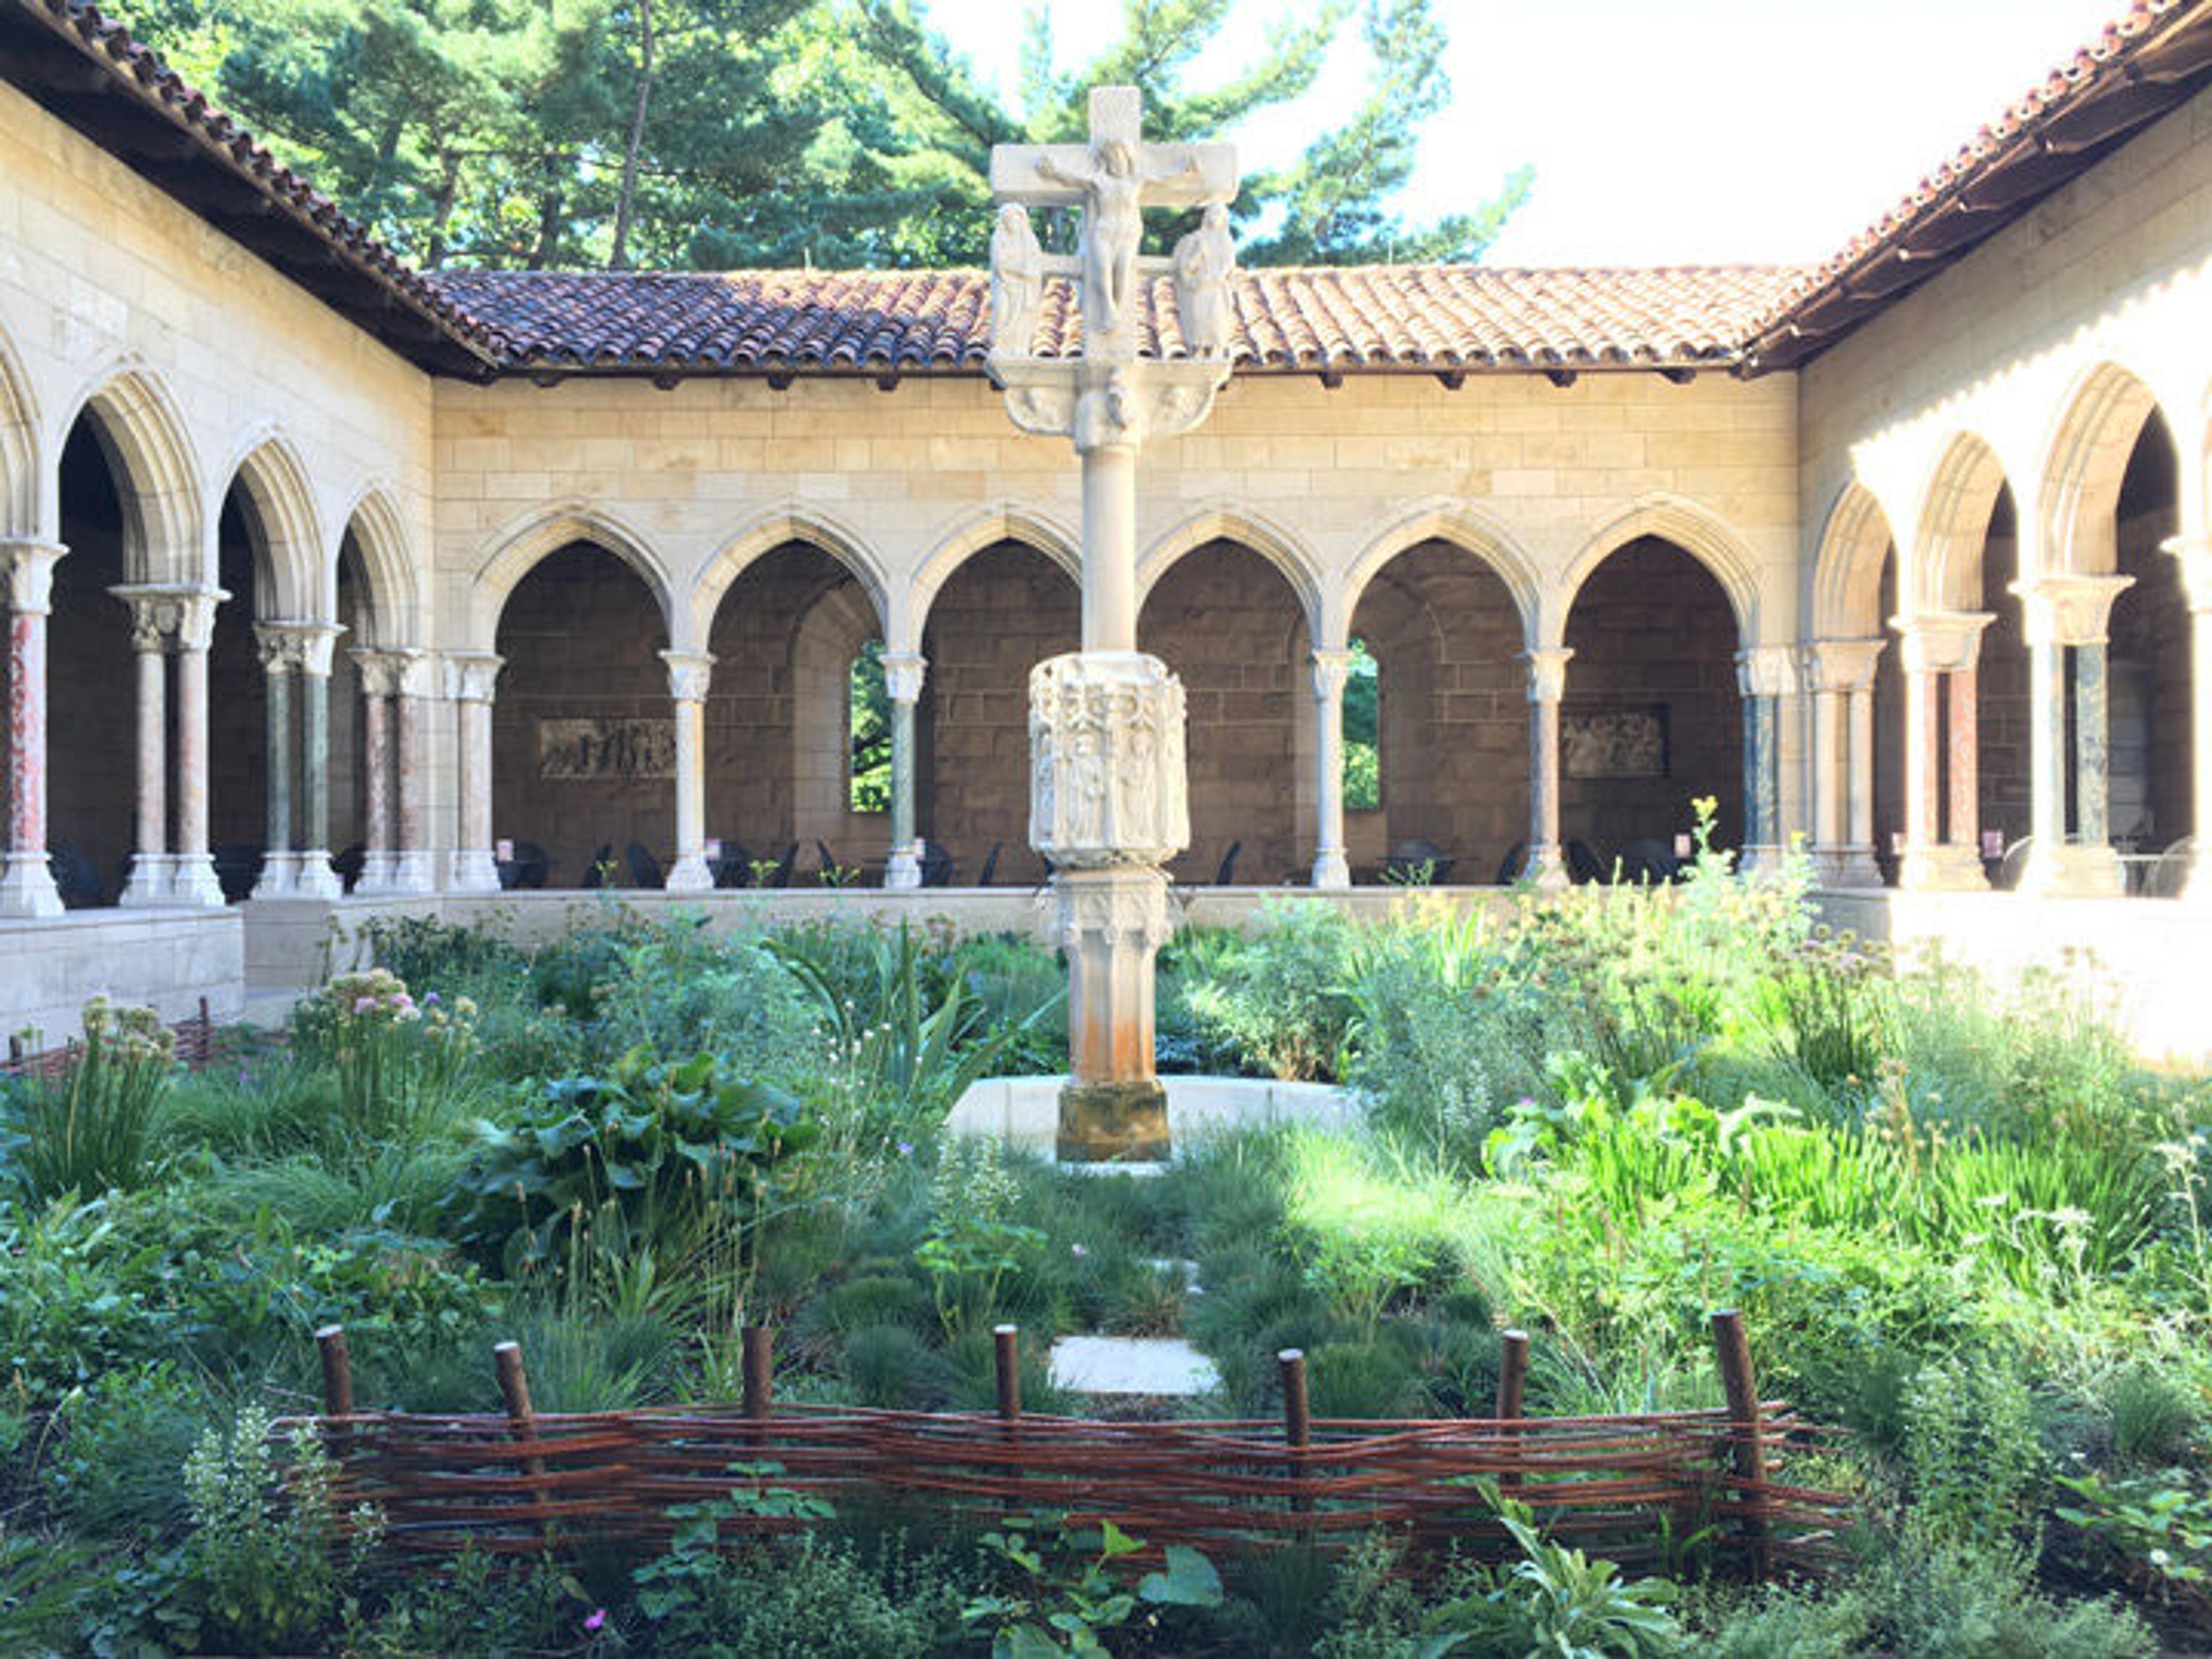 A fountain at the center of the gardent of the Trie Cloister